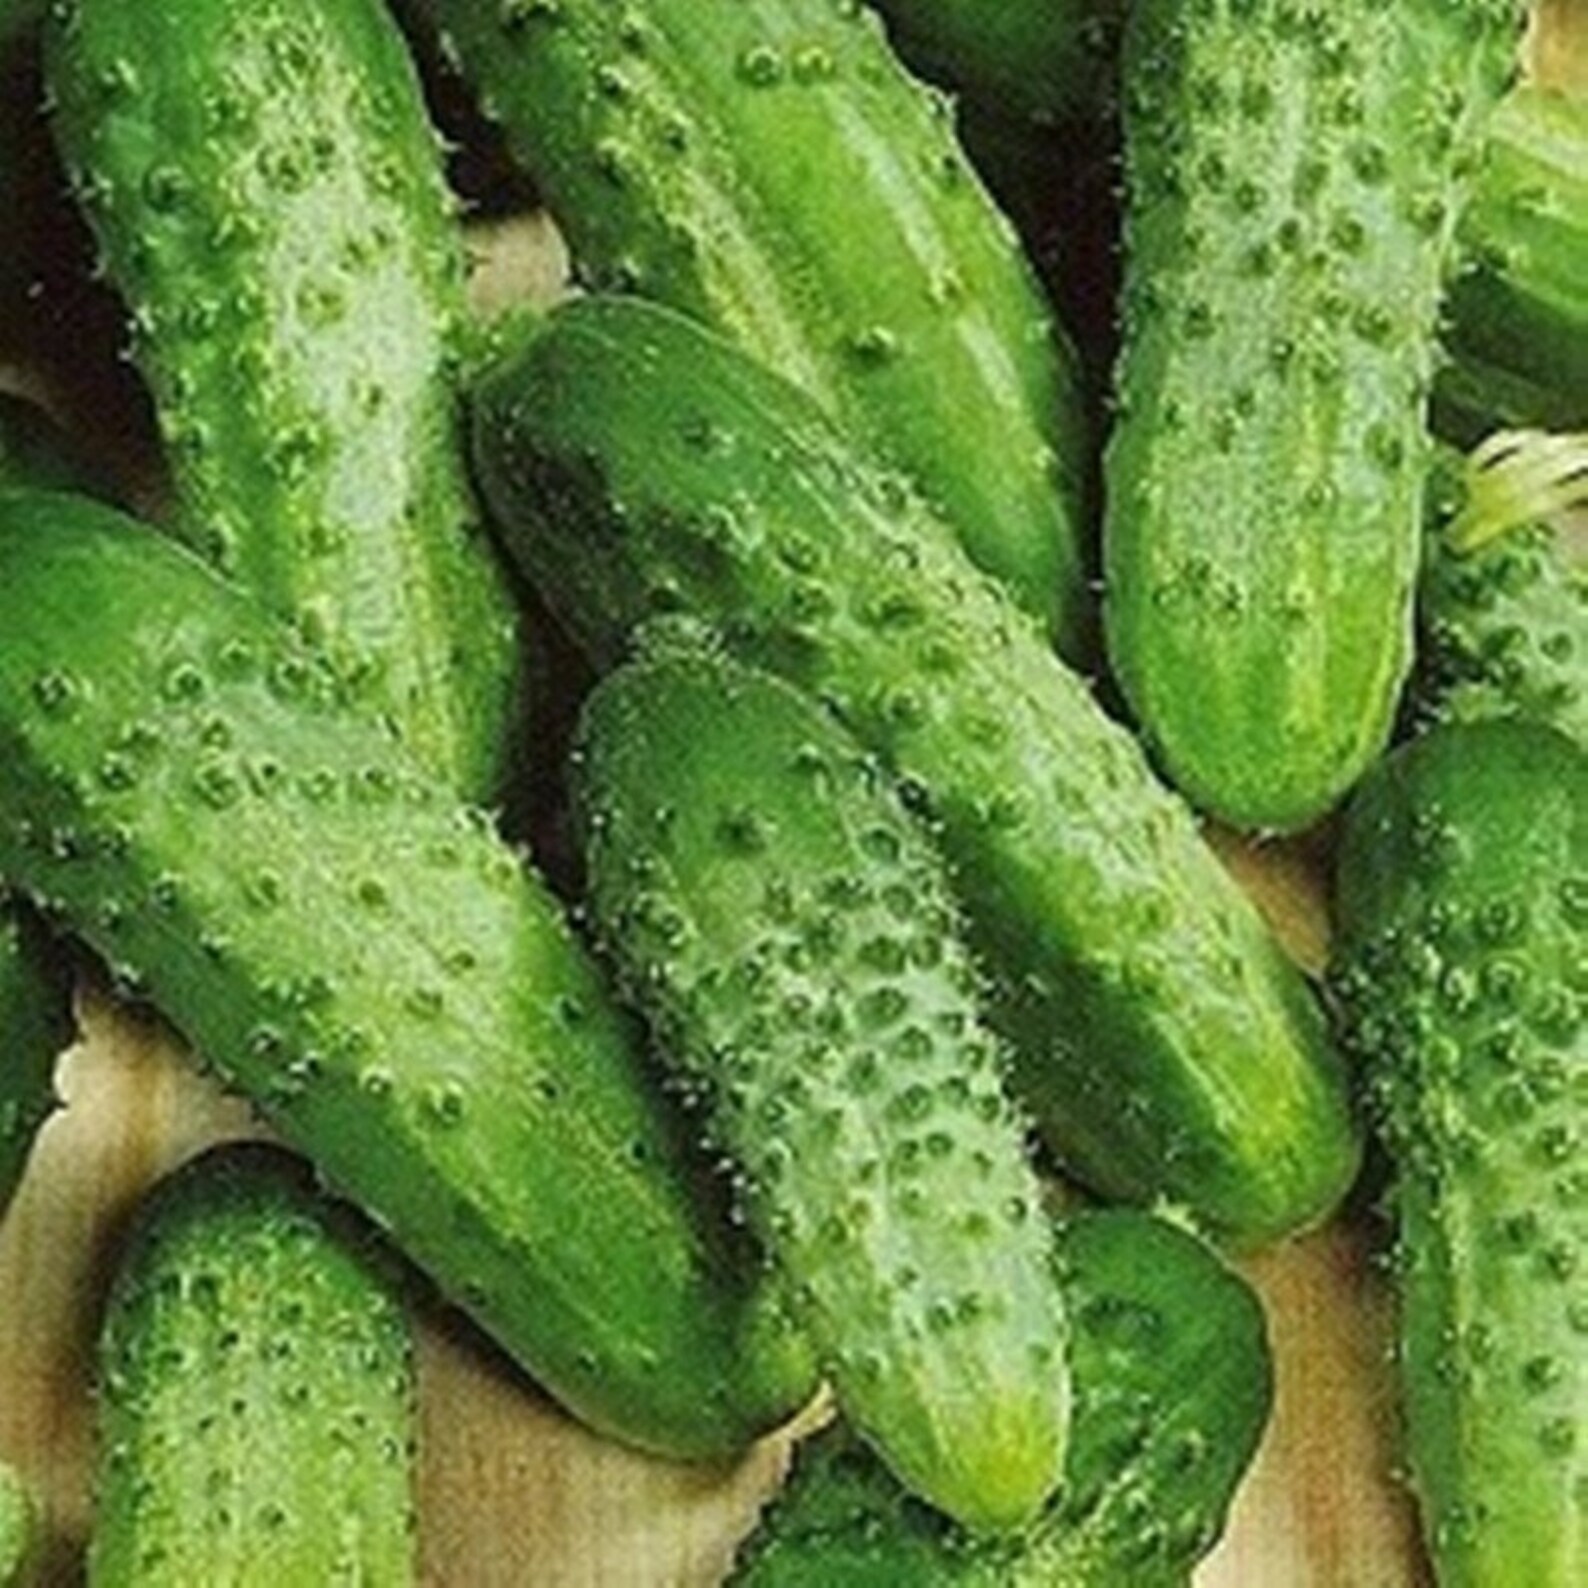 Cucumber Field Heirloom Seeds NON GMO for Planting 203959 | Etsy